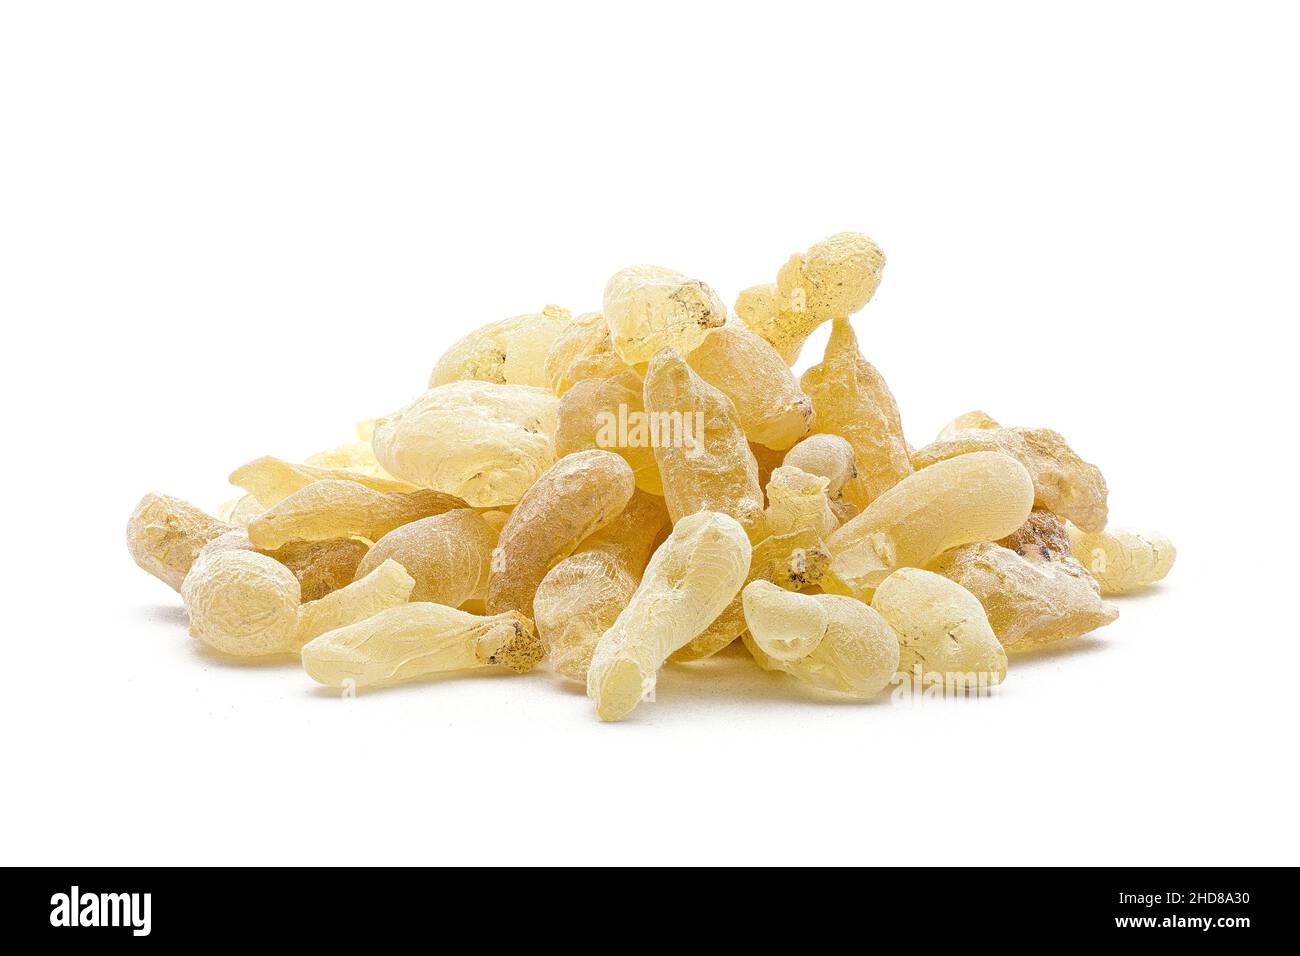 Chios mastic tears on a white background. (Pistacia lentiscus) Stock Photo